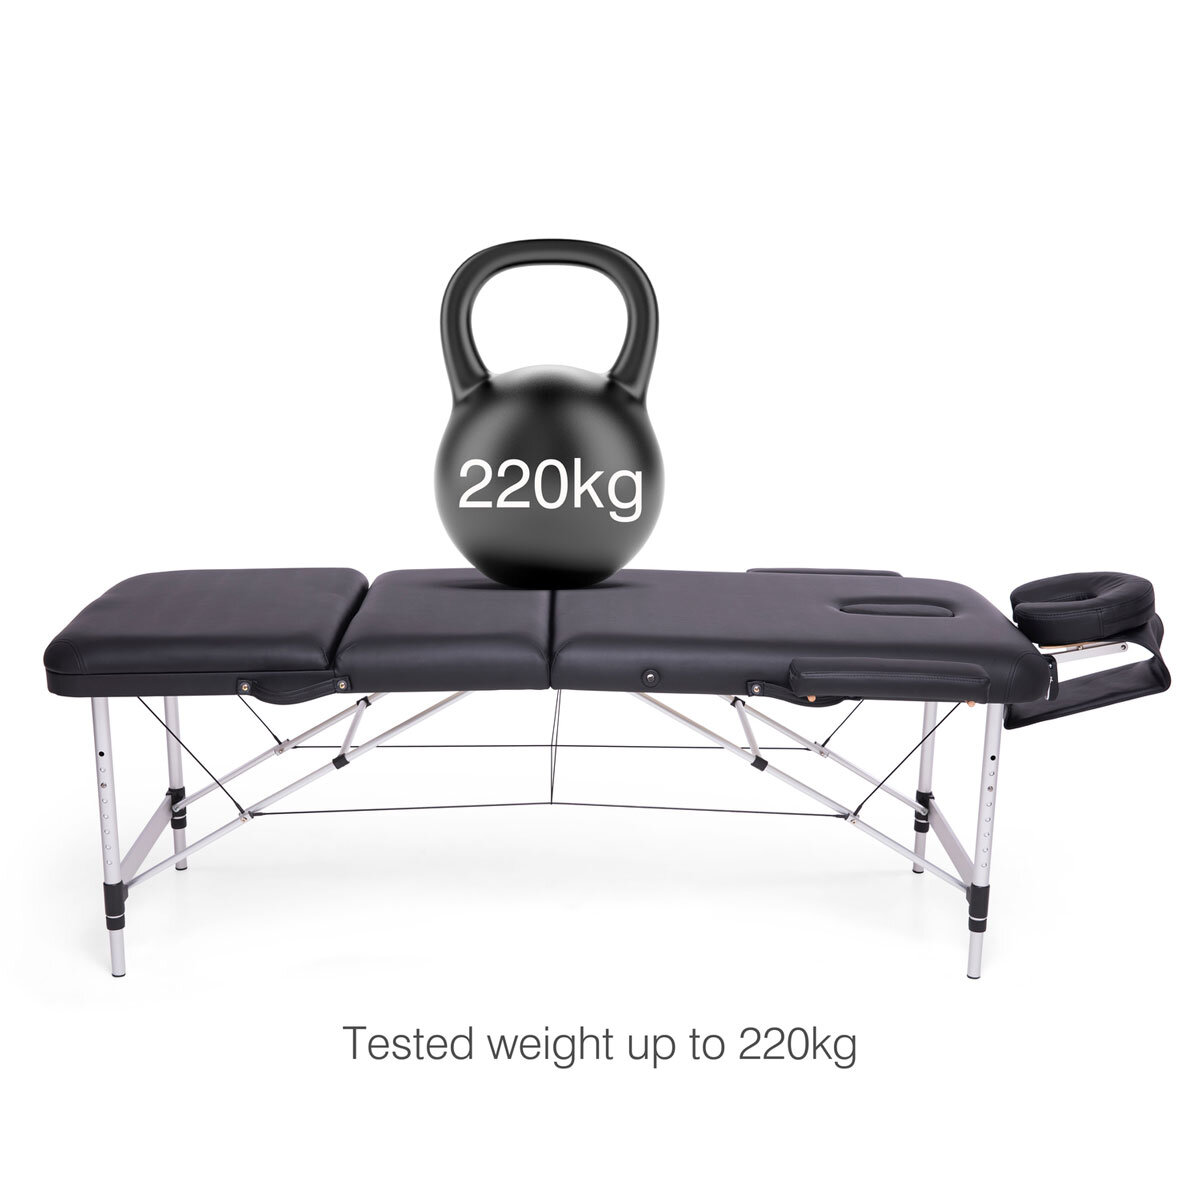 Dezac Professional Massage Chair illustrating its ability to hold 220kg in weight